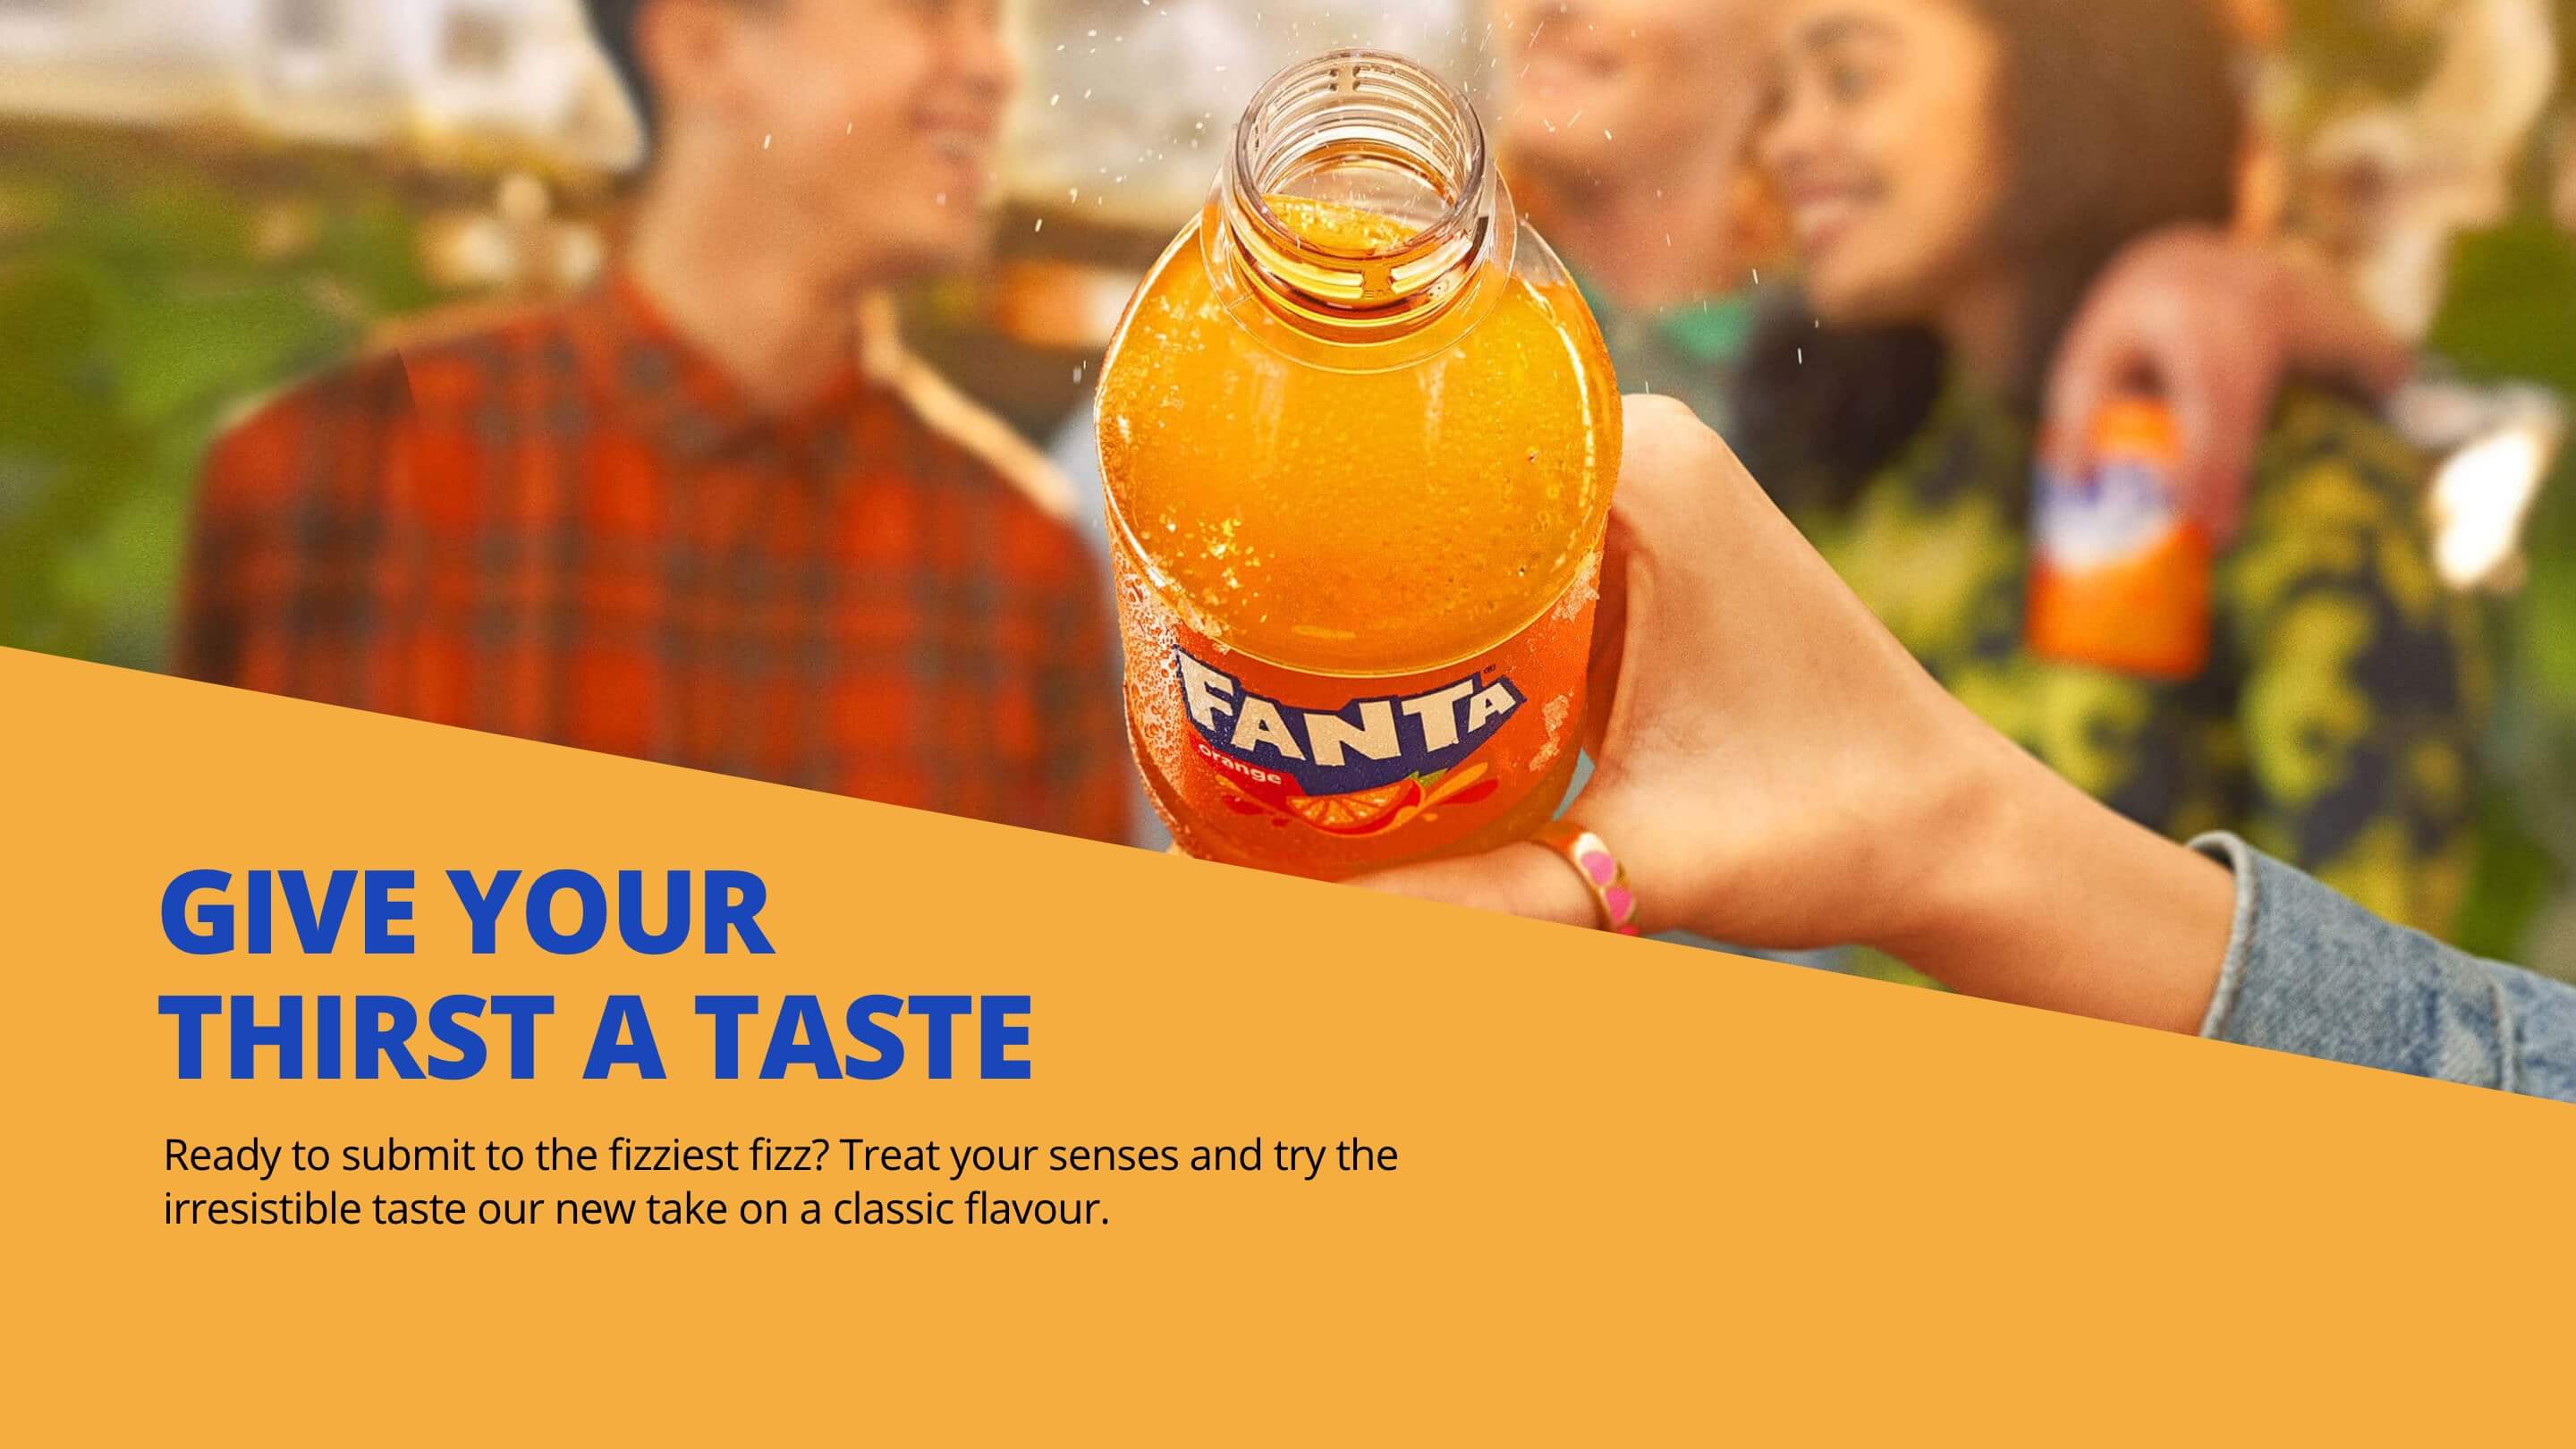 Fanta. Give your thirst a taste. Ready to submit to the fizziest fizz? Treat your senses and try the irresistible taste our new take on a classic flavour.